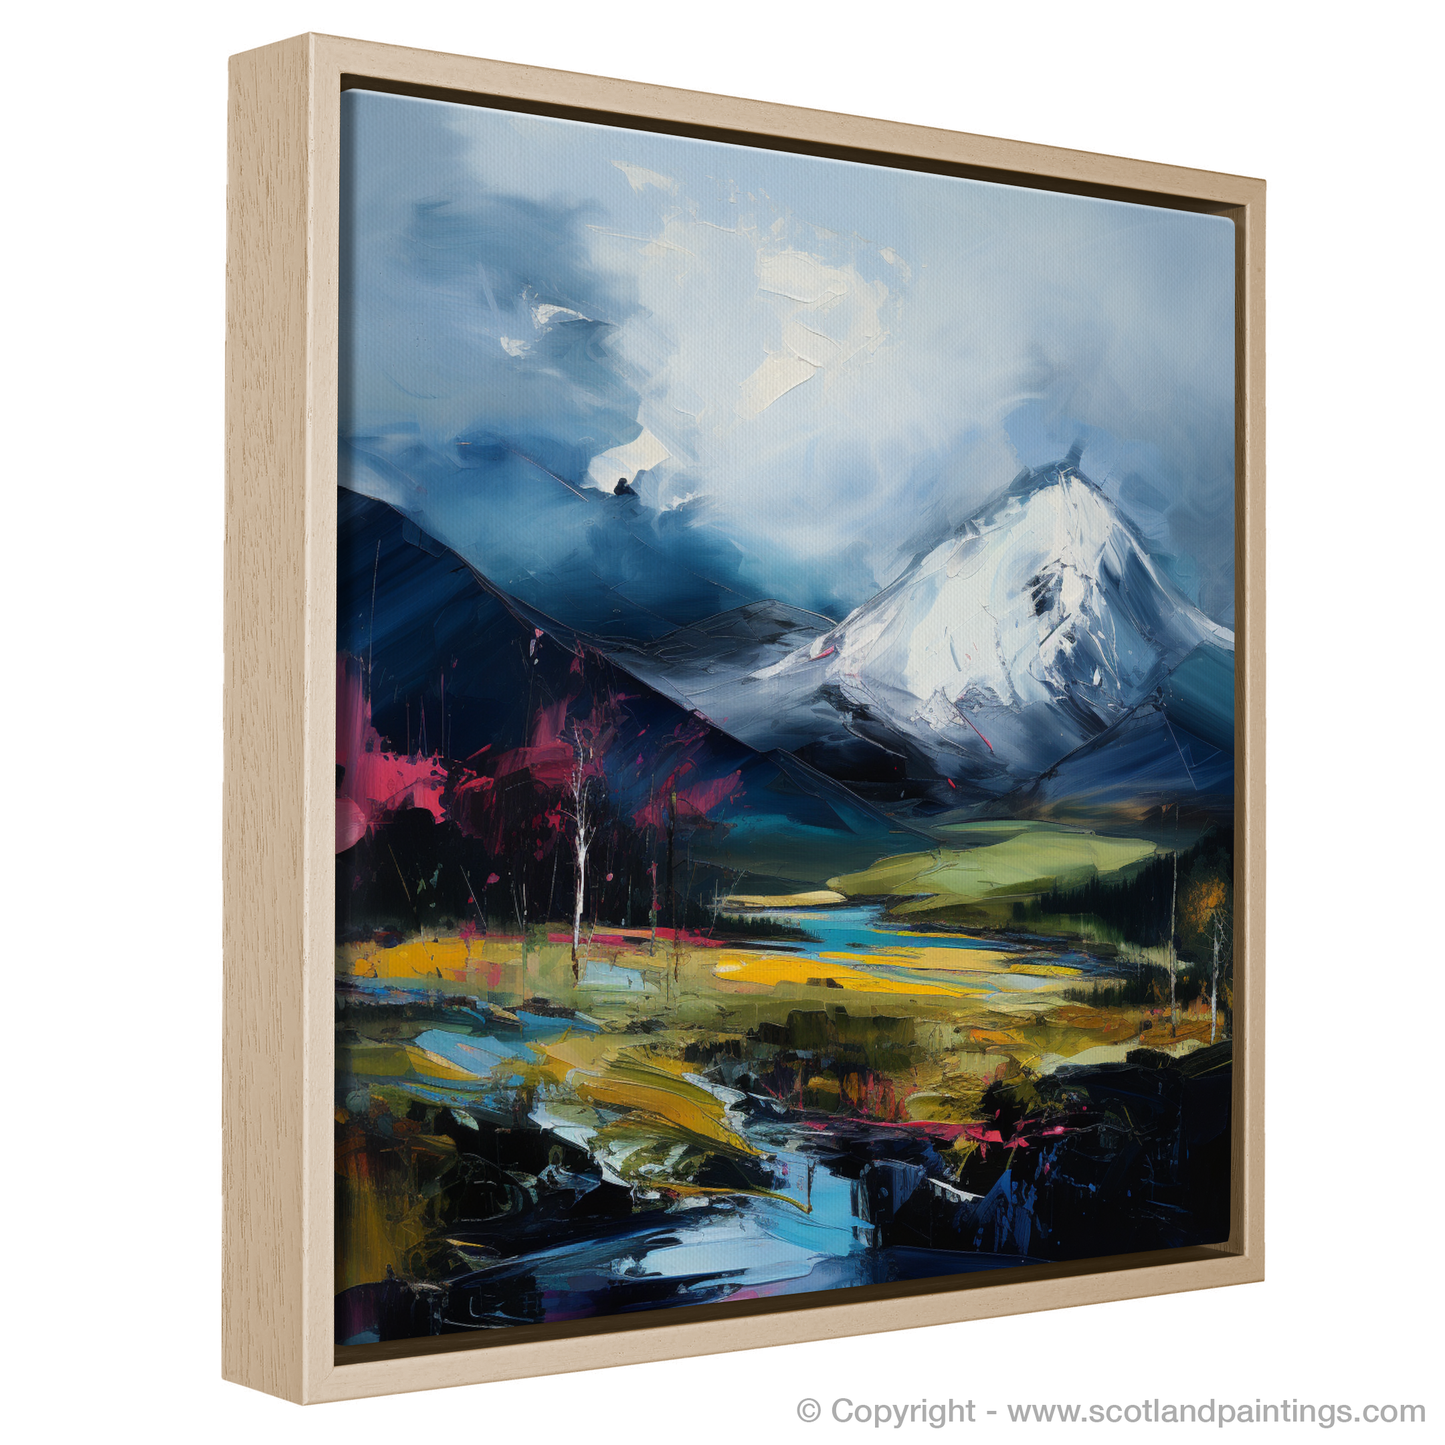 Painting and Art Print of Meall Corranaich entitled "Majestic Meall Corranaich: An Expressionist Ode to Scottish Wilderness".